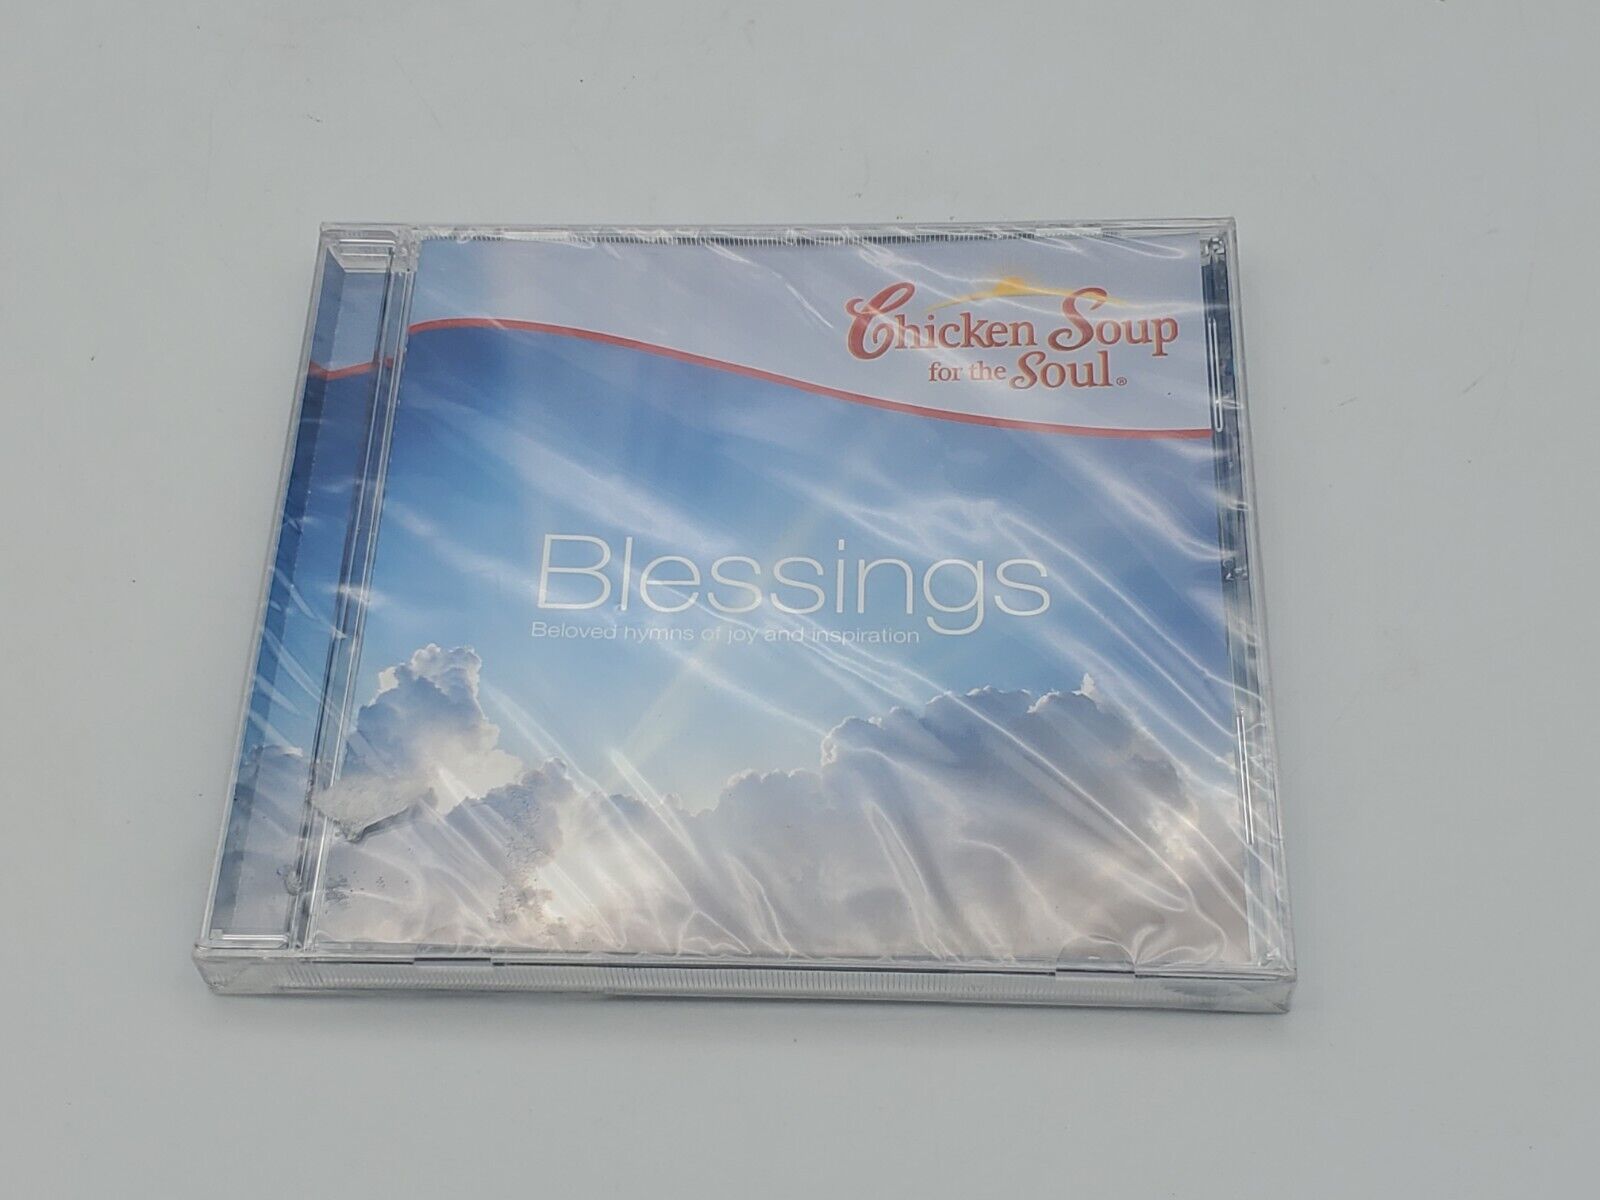 Chicken Soup for the Soul: Blessings CD by Steve Wingfield (CD, Jan-2013) - New